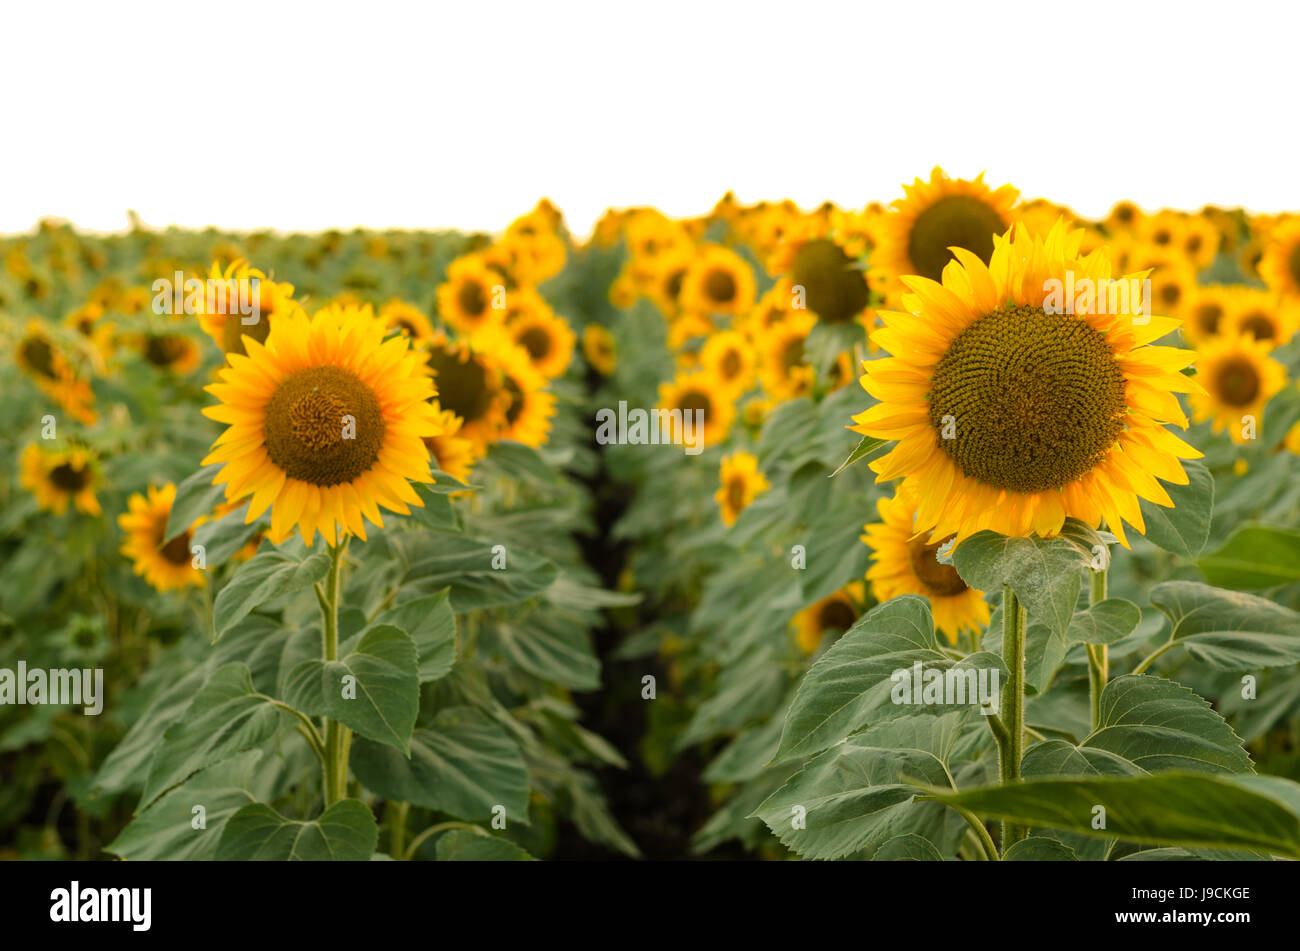 Beautiful sunflowers in the field Stock Photo